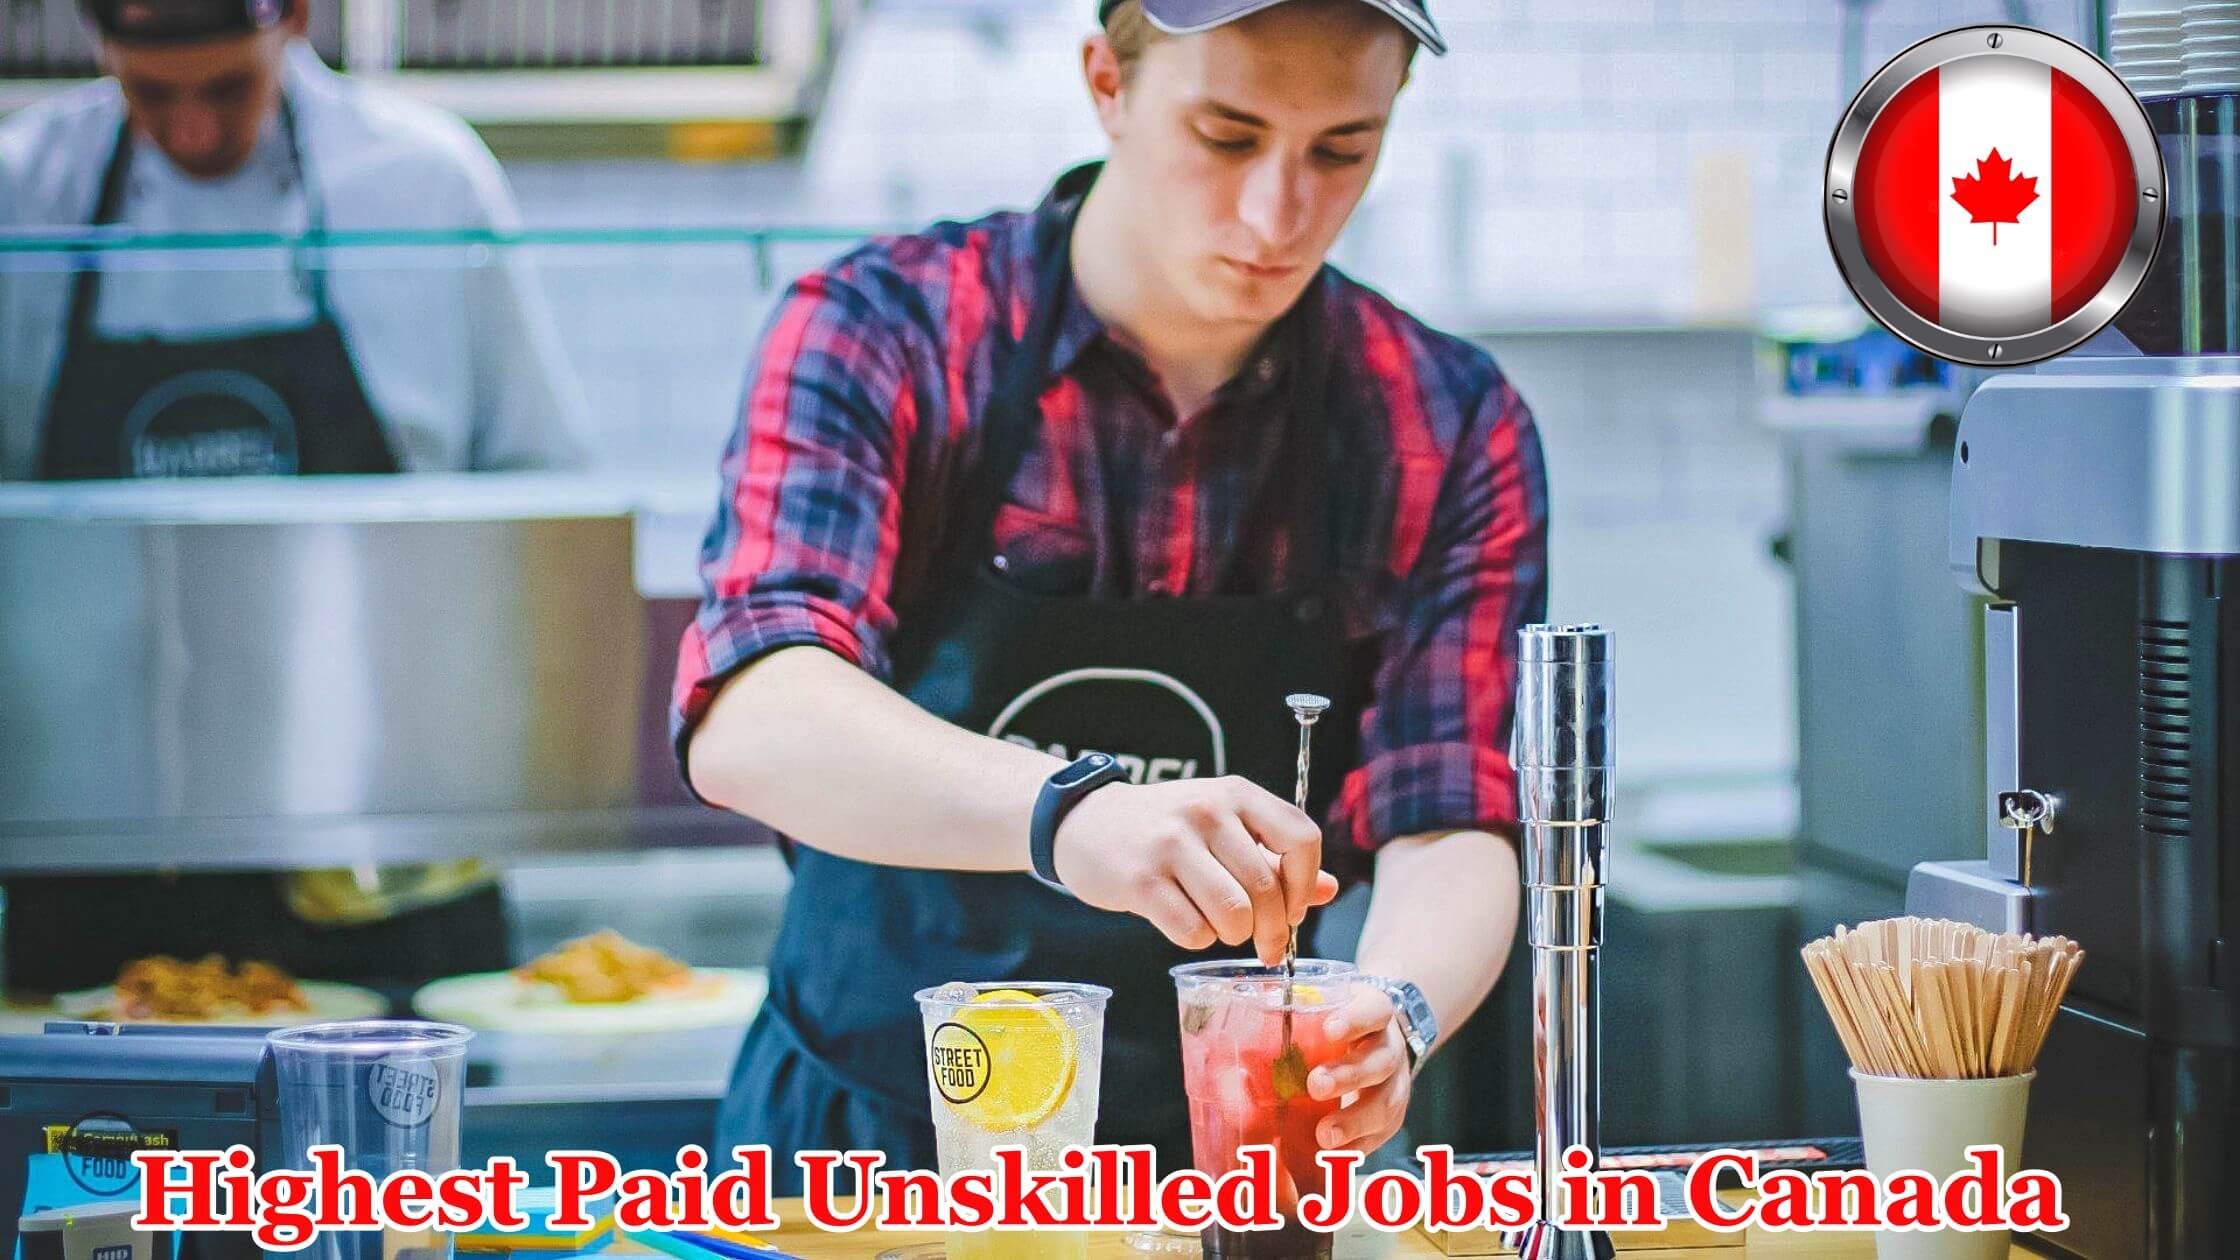 List Of Highest Paid Unskilled Jobs in Canada | The Last On The List Will Suprise You